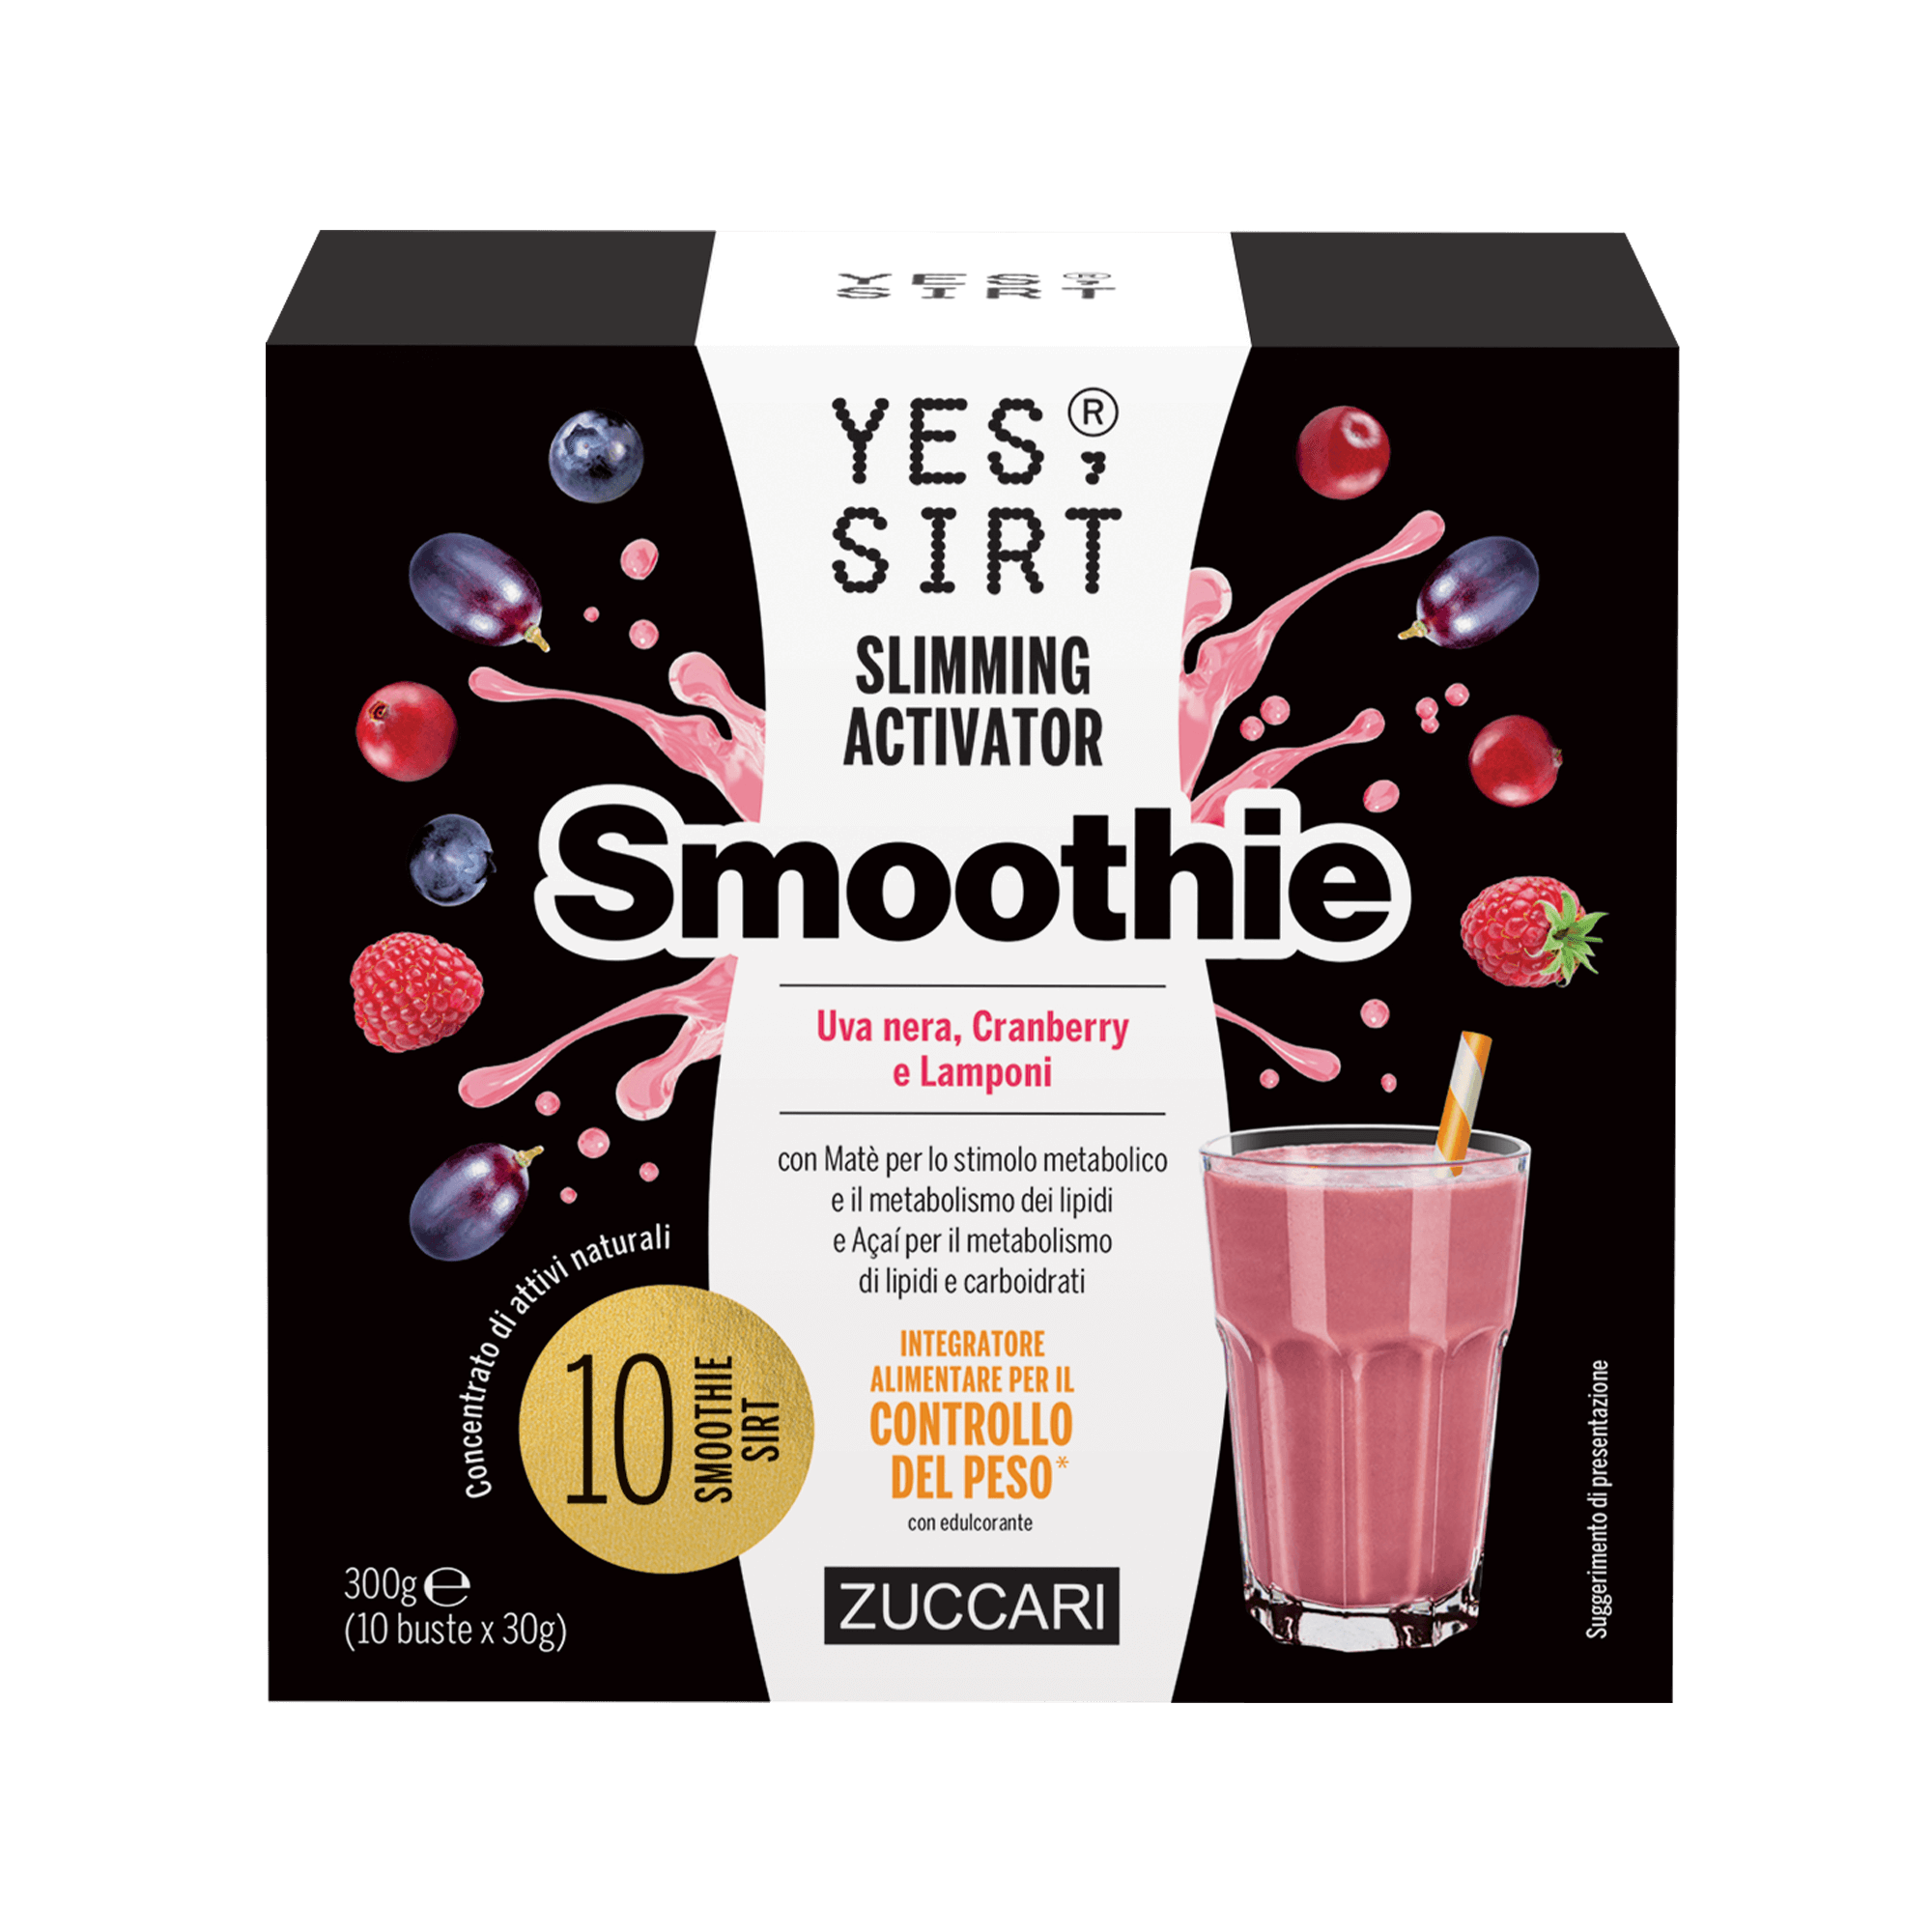 COMING SOON – Yes Sirt Slimming Activator Smoothie Uva nera, Cranberry e Lamponi